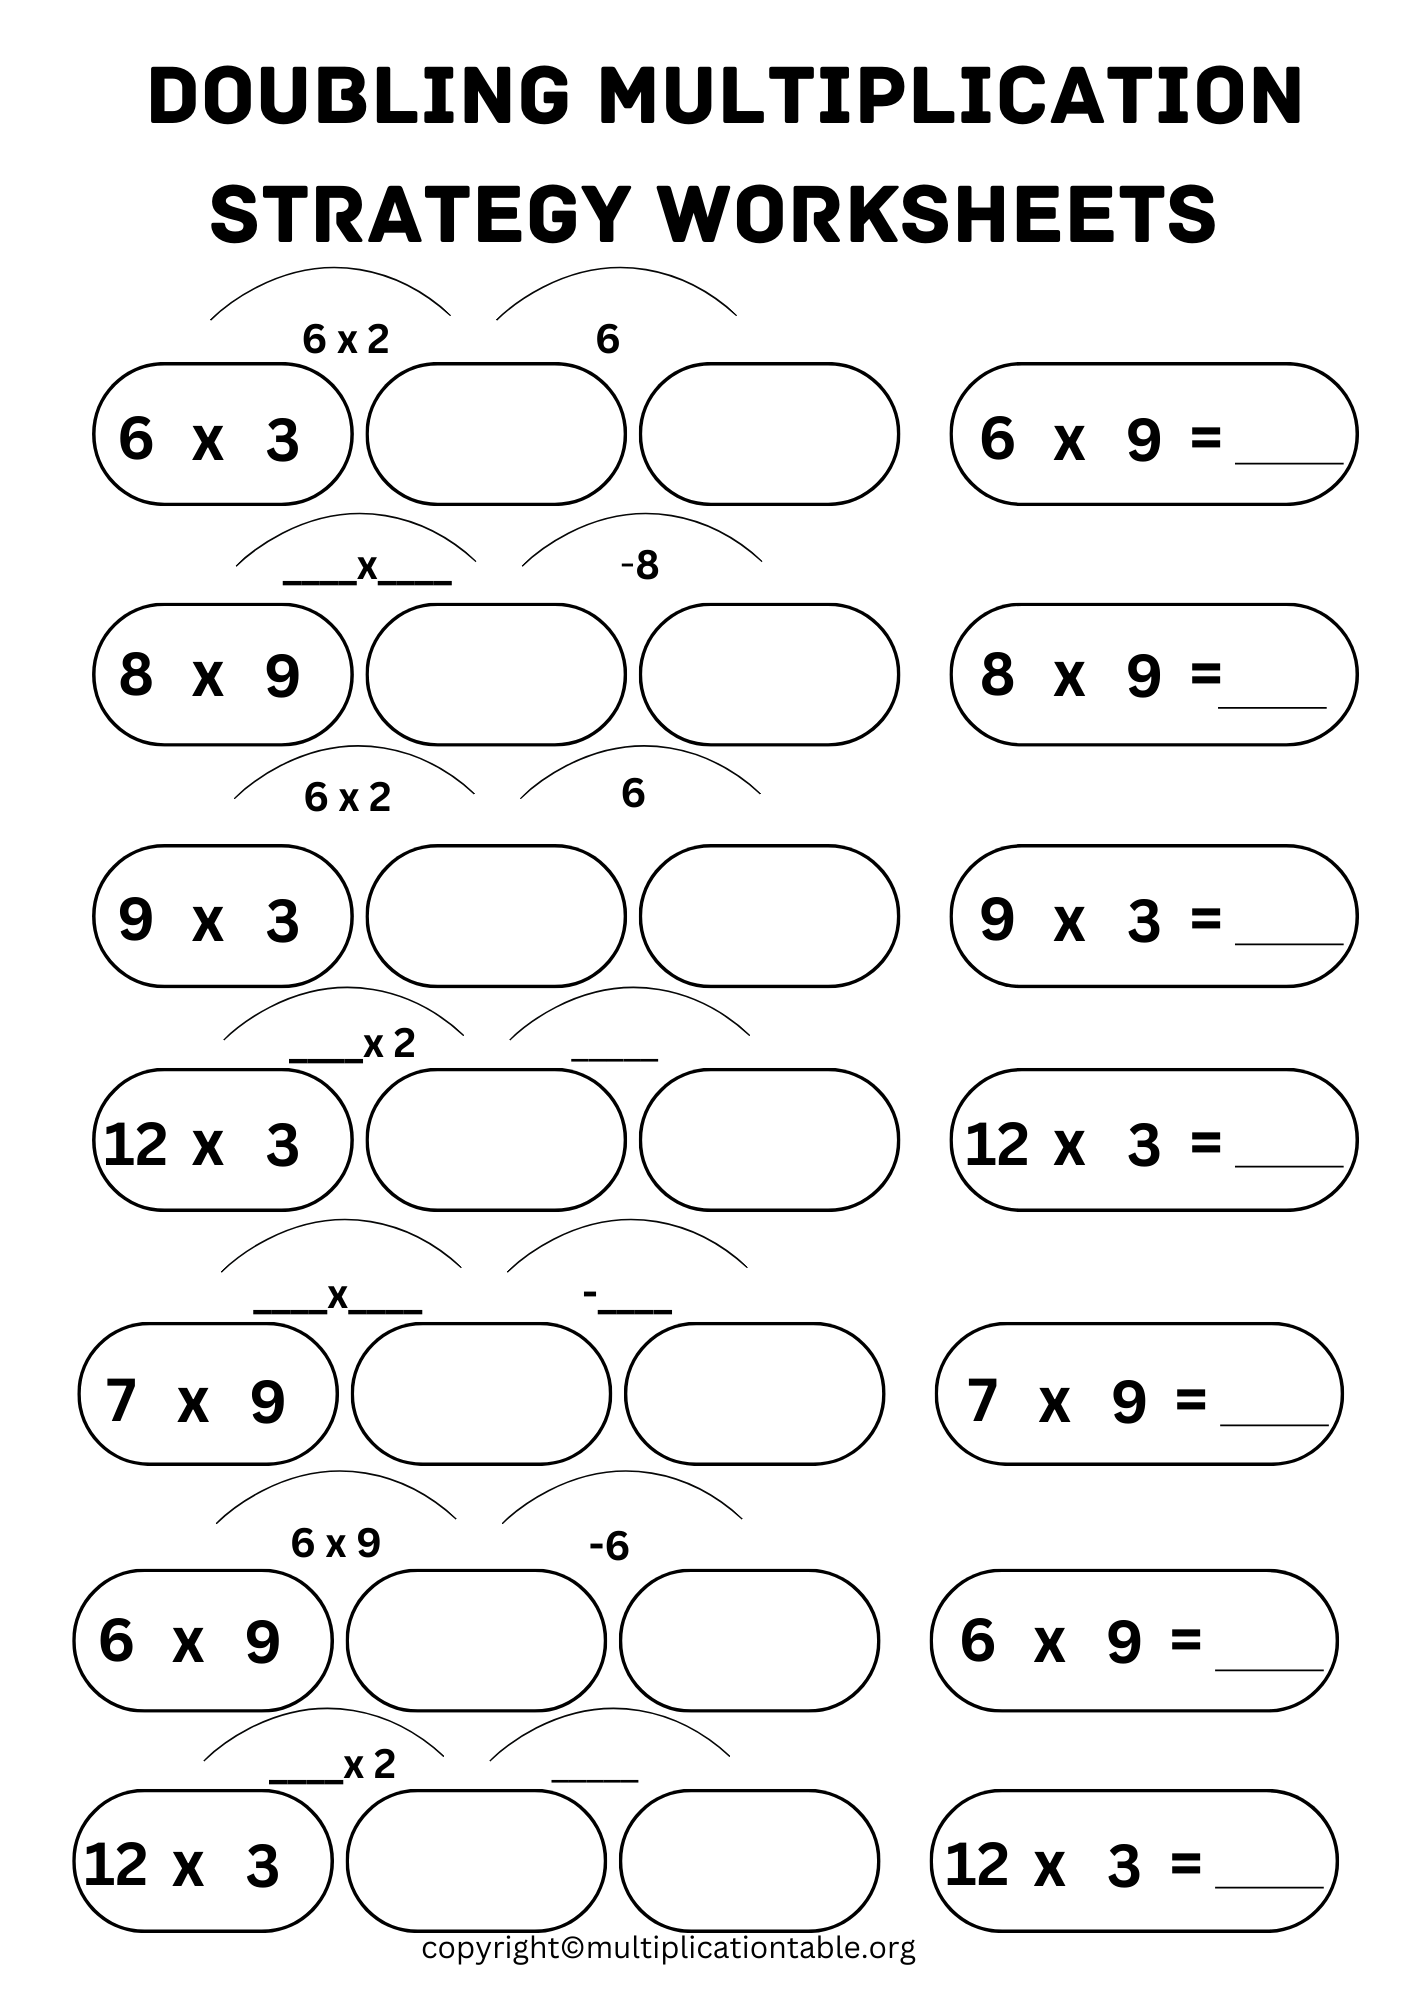 doubling-multiplication-strategy-worksheets-free-printable